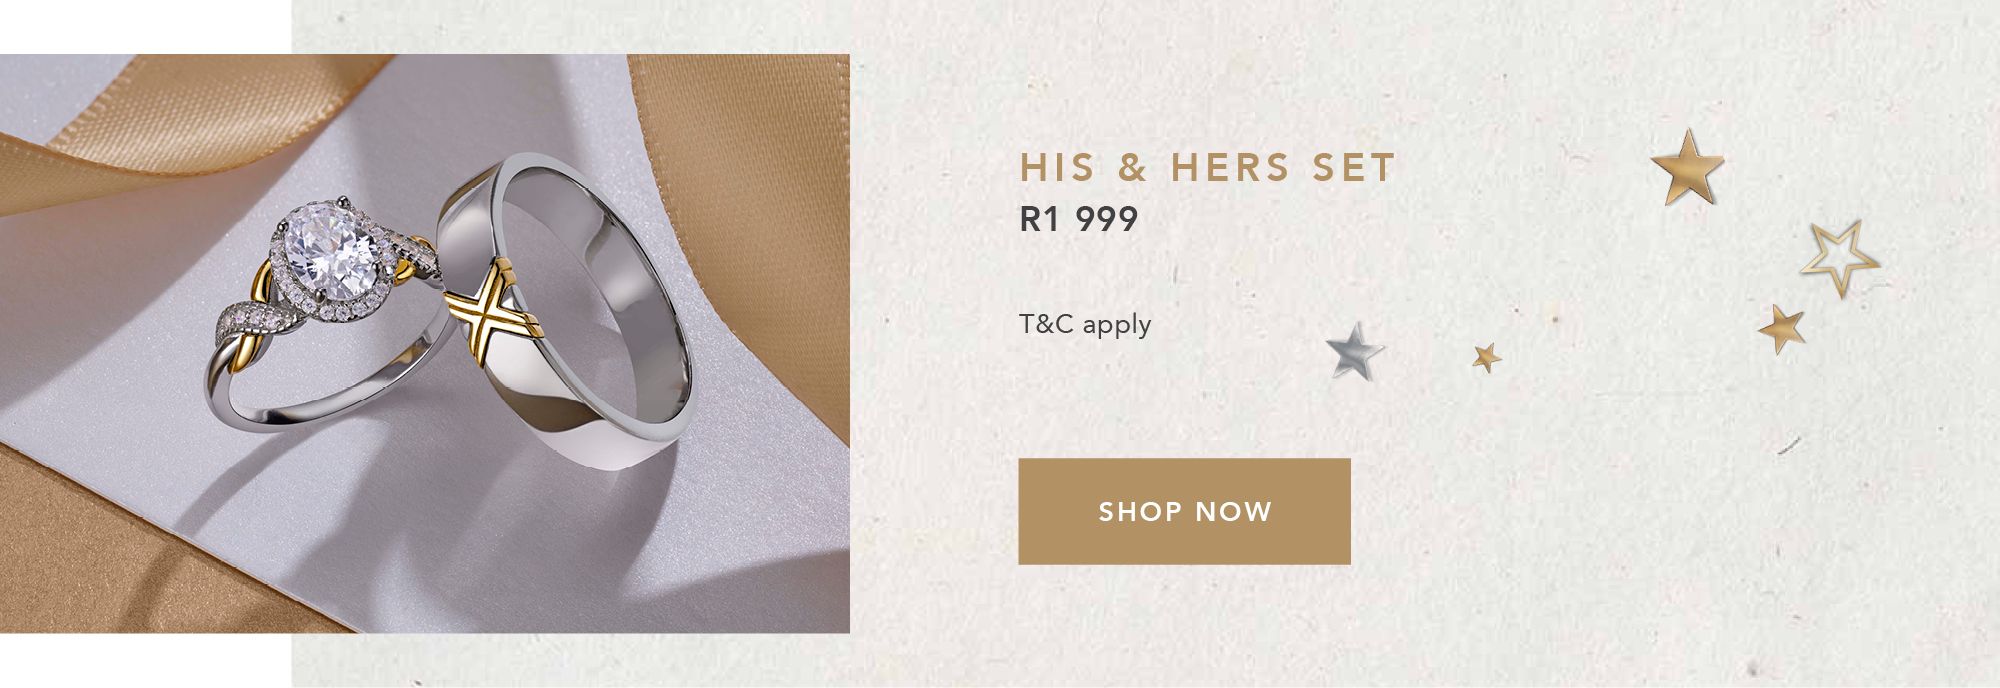 HIS & HERS SET, R1 999